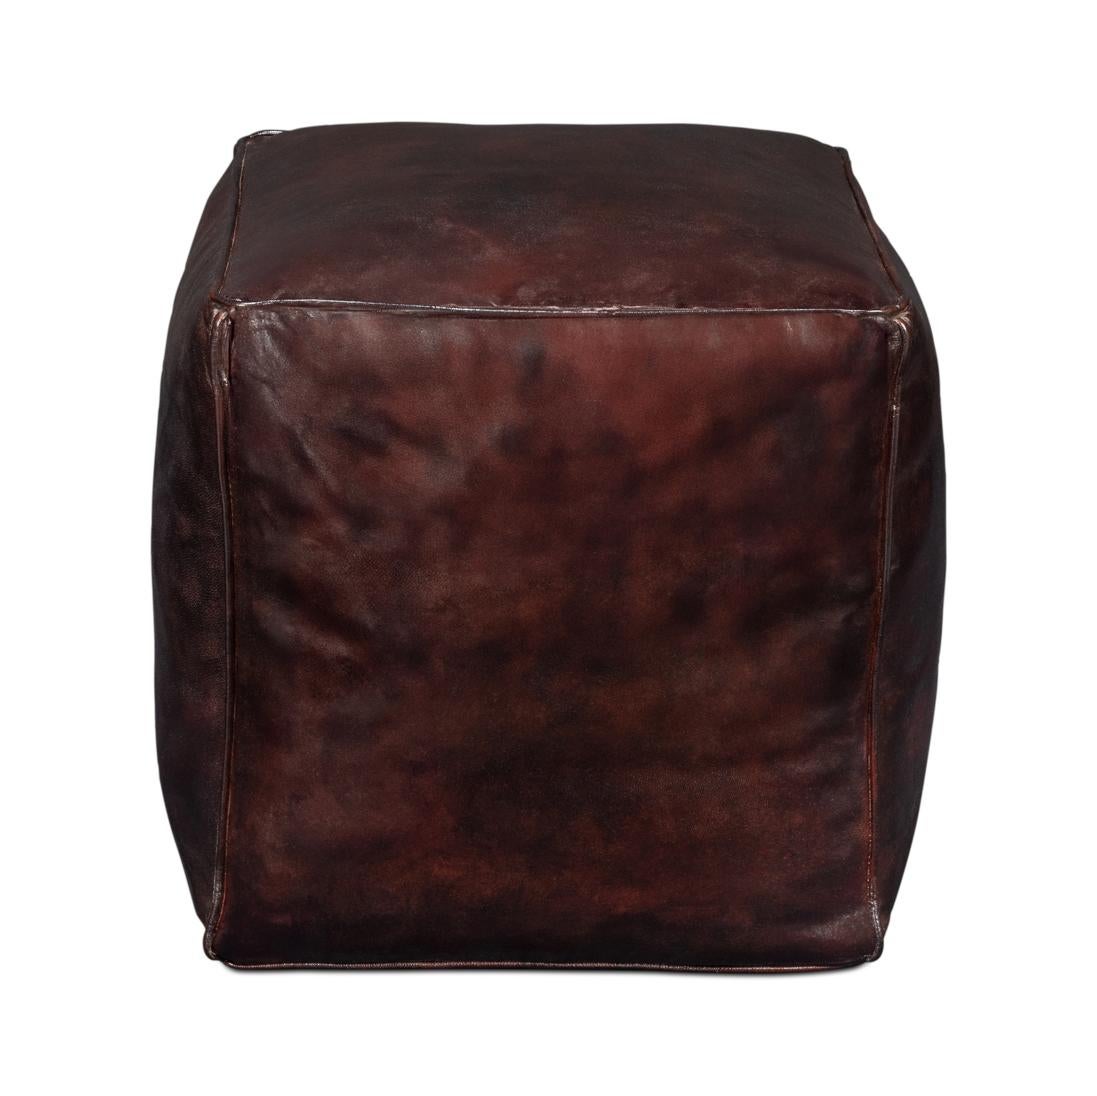 A perfect embodiment of comfort and sophistication. This piece is expertly crafted with its wooden structure while elegantly enveloped in luxurious dark brown leather. Its design speaks volumes of transitional elegance, seamlessly blending into